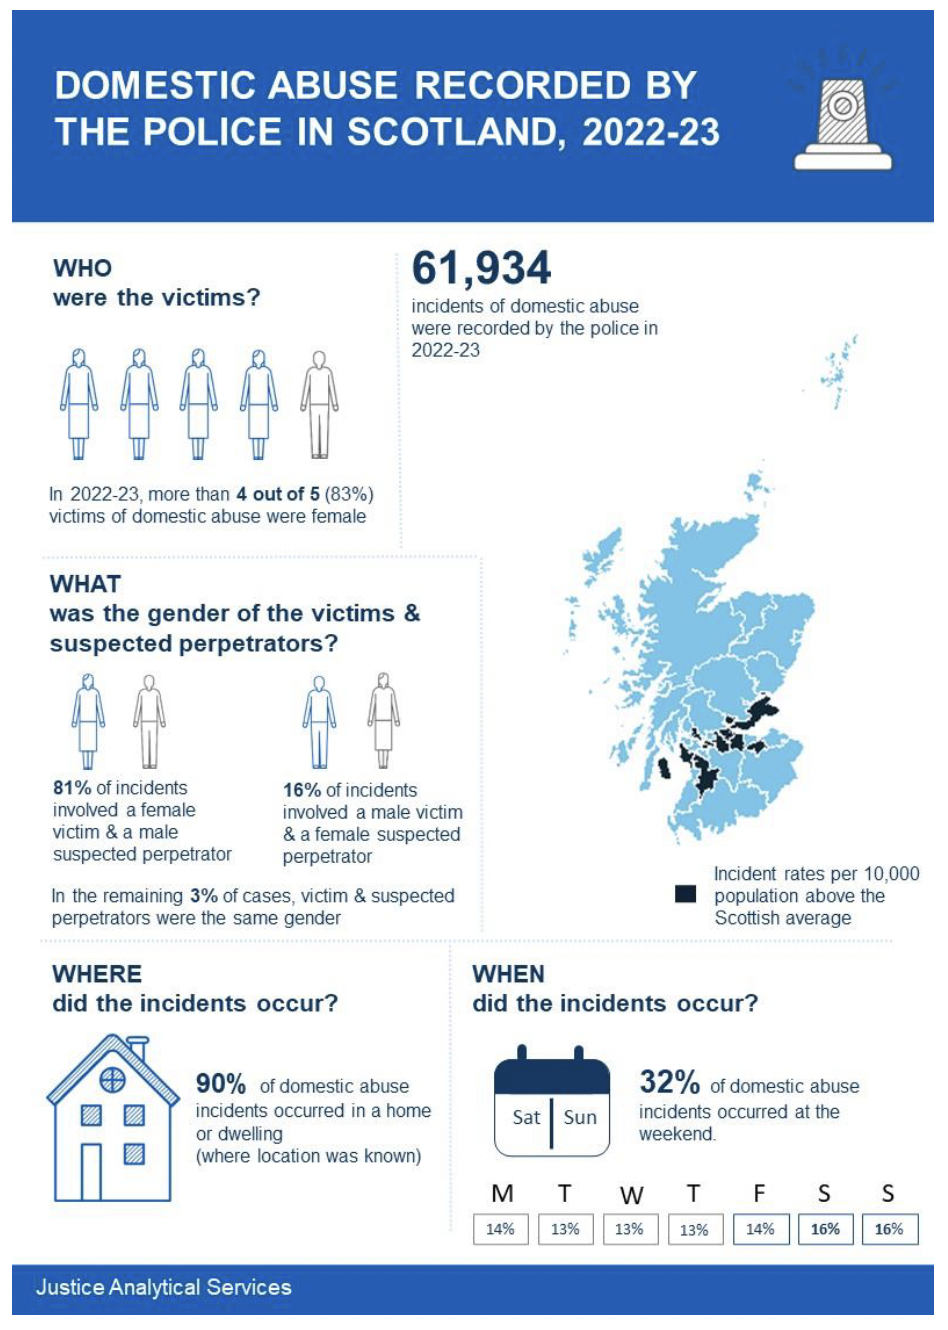 A full page infographic summarising some of the main points.
61,934 incidents of domestic abuse were recorded by the police in 2022-23
Dundee City, West Lothian, Glasgow City, West Dunbartonshire, Fife, Falkirk, North Lanarkshire, East Ayrshire, Clackmannanshire, North Ayrshire and Midlothian had domestic abuse incident rates per 10,000 population above the Scottish average.
Who were the victims? In 2022-23, more than 4 out of 5 (83 percent) victims of domestic abuse were female
What was the gender of the victims and suspected perpetrators? 81 percent of incidents involved a female victim and a male suspected perpetrator. 16 percent of incidents involved a male victim and a female suspected perpetrator. In the remaining 3 percent of cases, the victim and suspected perpetrator were the same gender 
Where did the incident occur? 90 percent of domestic abuse incidents occurred in a home or dwelling (where location was known).
When did incidents occur? 32 percent of domestic abuse incidents occurred at the weekend. 14 percent on Mondays, 13 percent on Tuesdays, Wednesdays and Thursdays, 14 percent on Fridays, 16 percent on Saturdays and Sundays.
